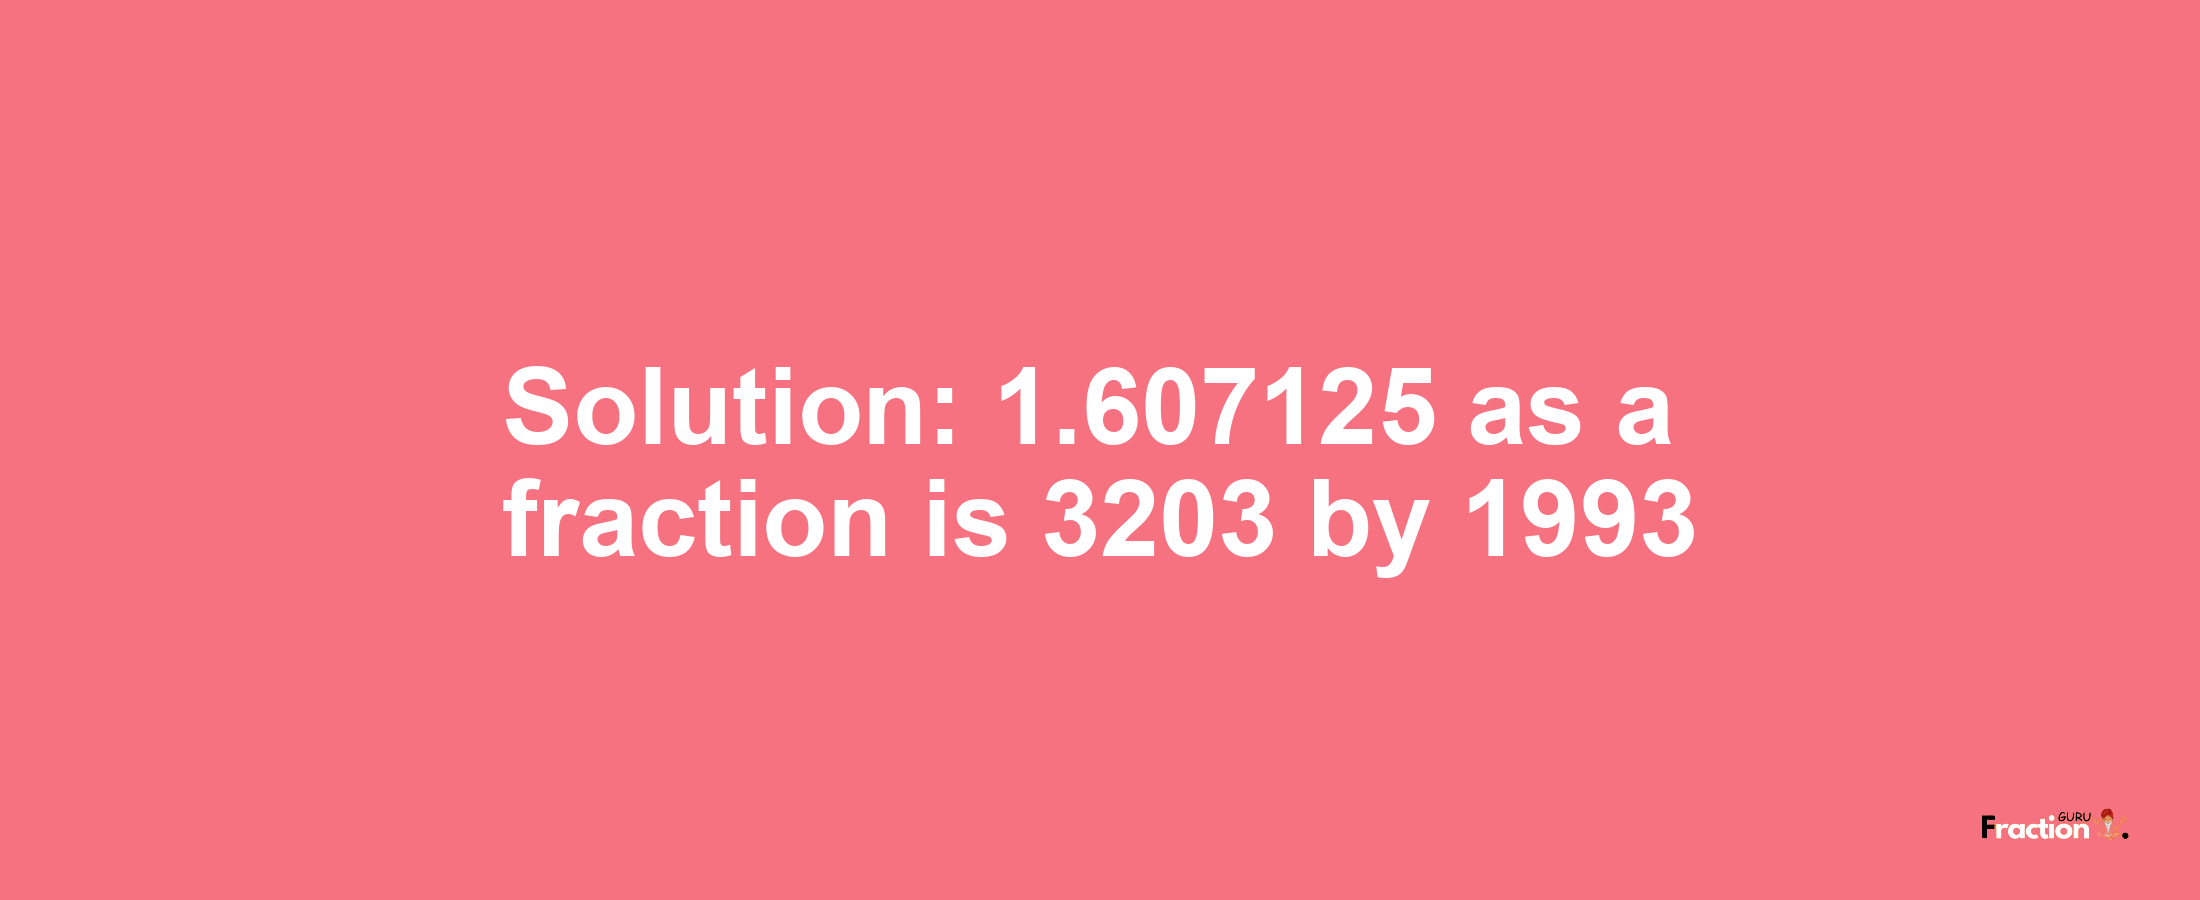 Solution:1.607125 as a fraction is 3203/1993